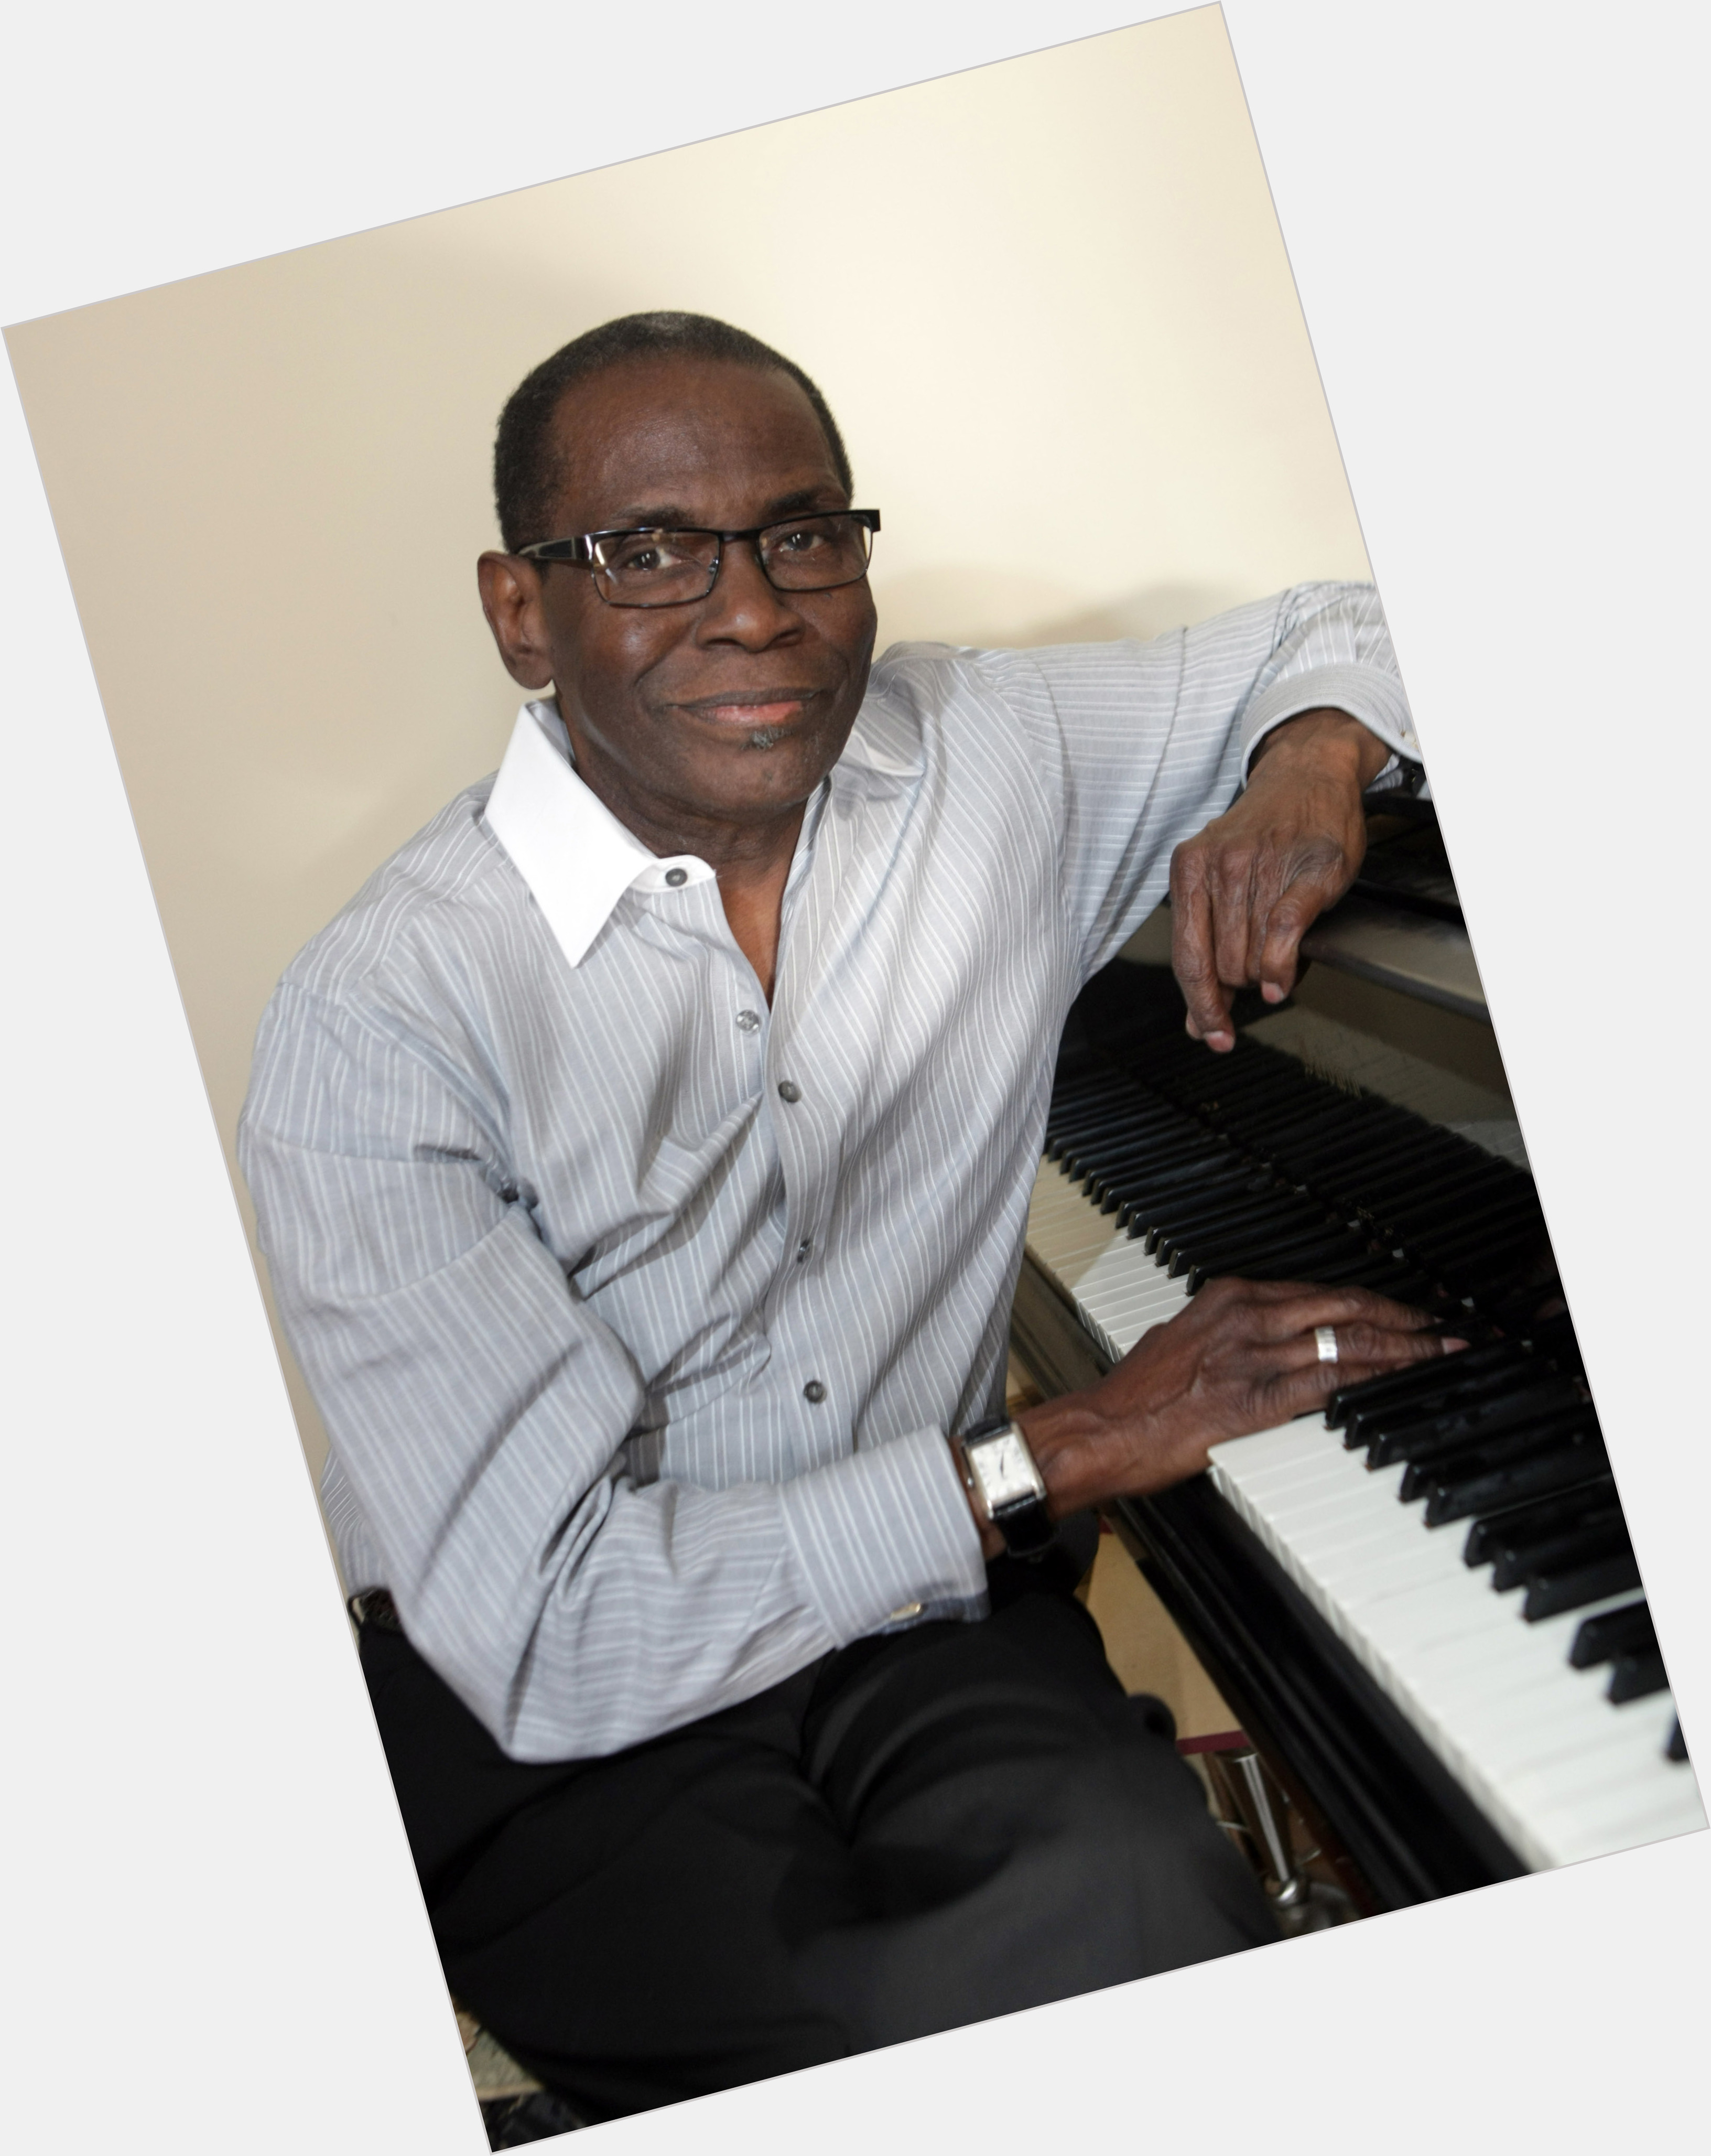 Http://fanpagepress.net/m/G/George Cables Dating 2